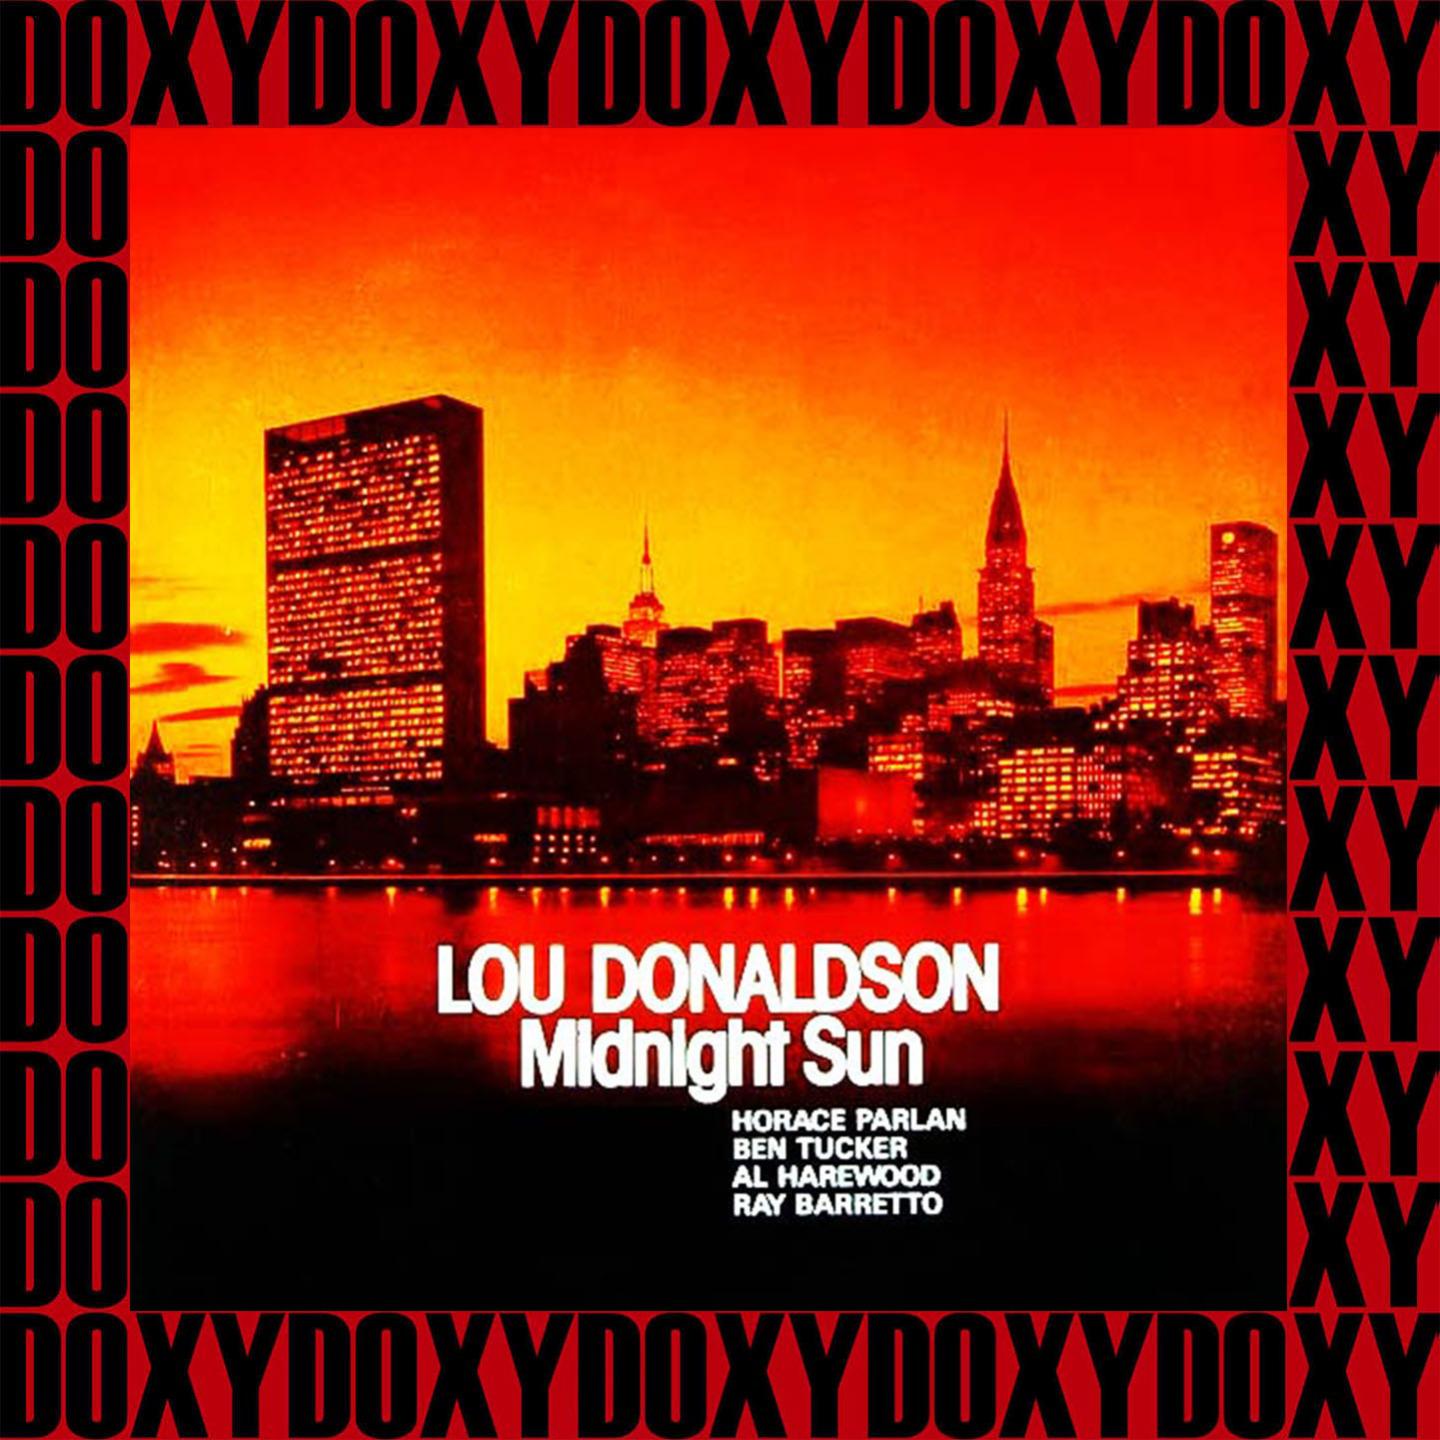 Midnight Sun (Blue Note Limited, Remastered Version) (Doxy Collection)